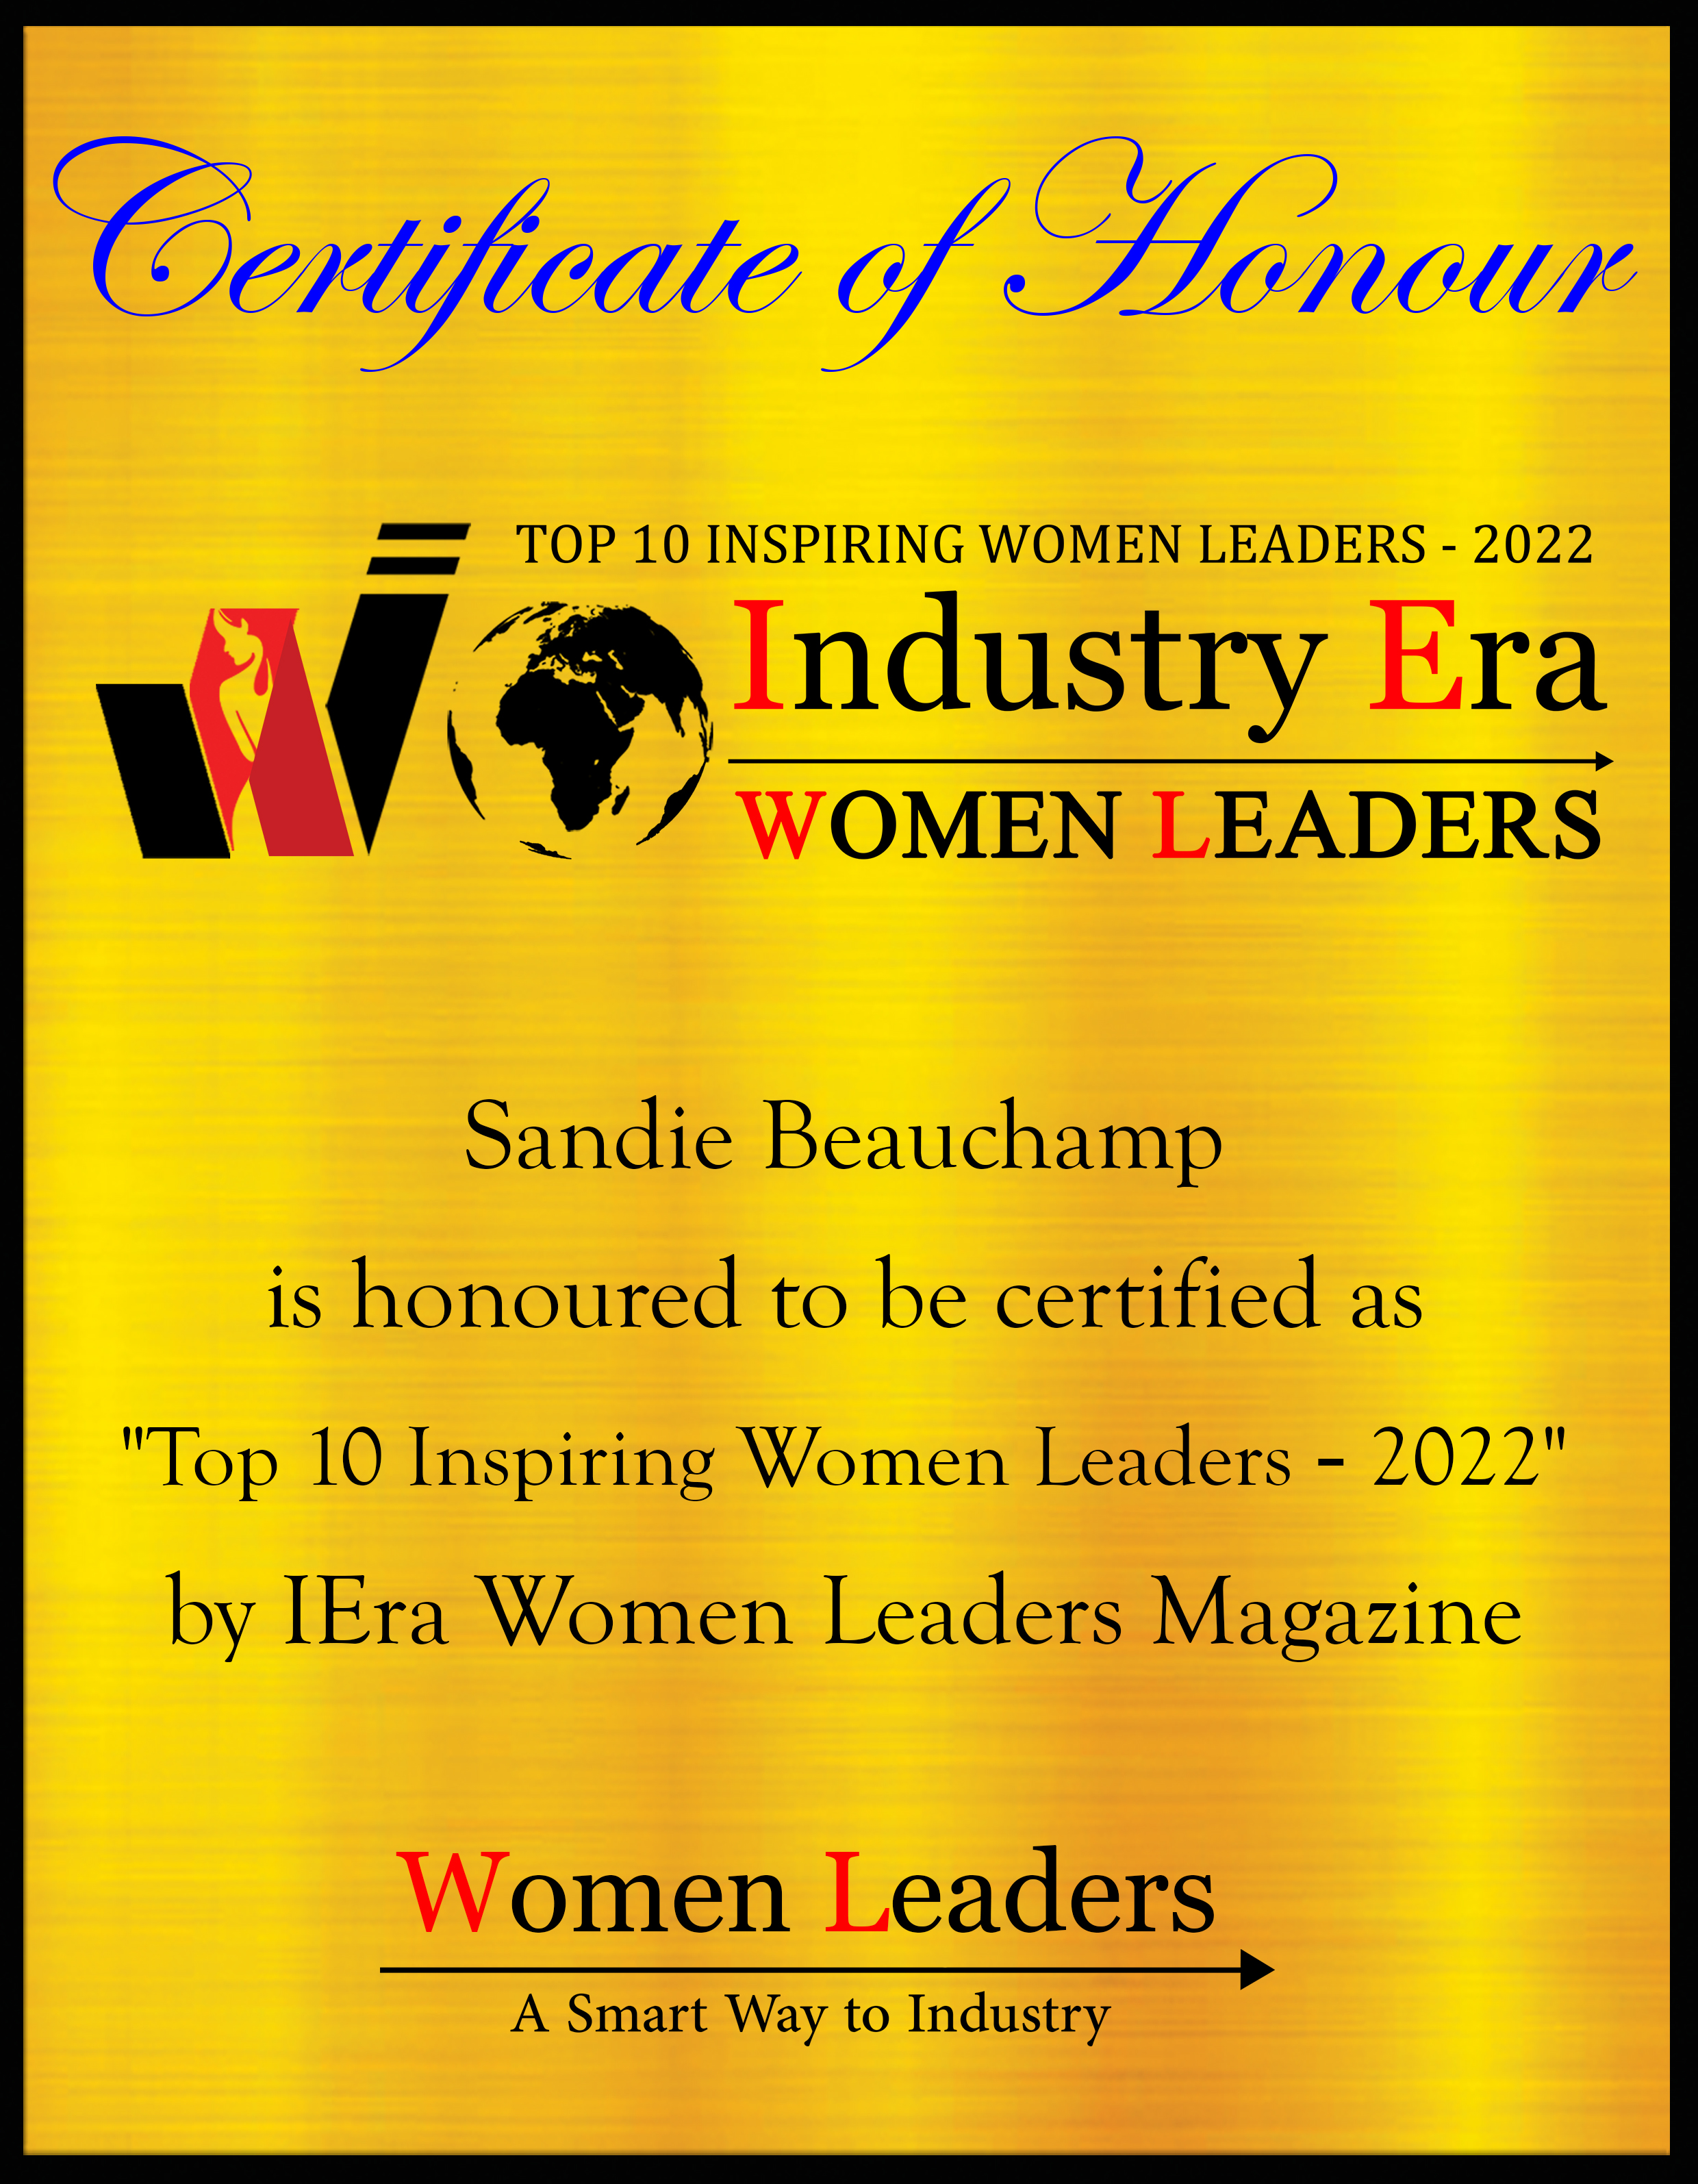 Sandie Beauchamp, Chief Experience Officer of Clean the World, Top 10 Inspiring Women Leaders of 2022